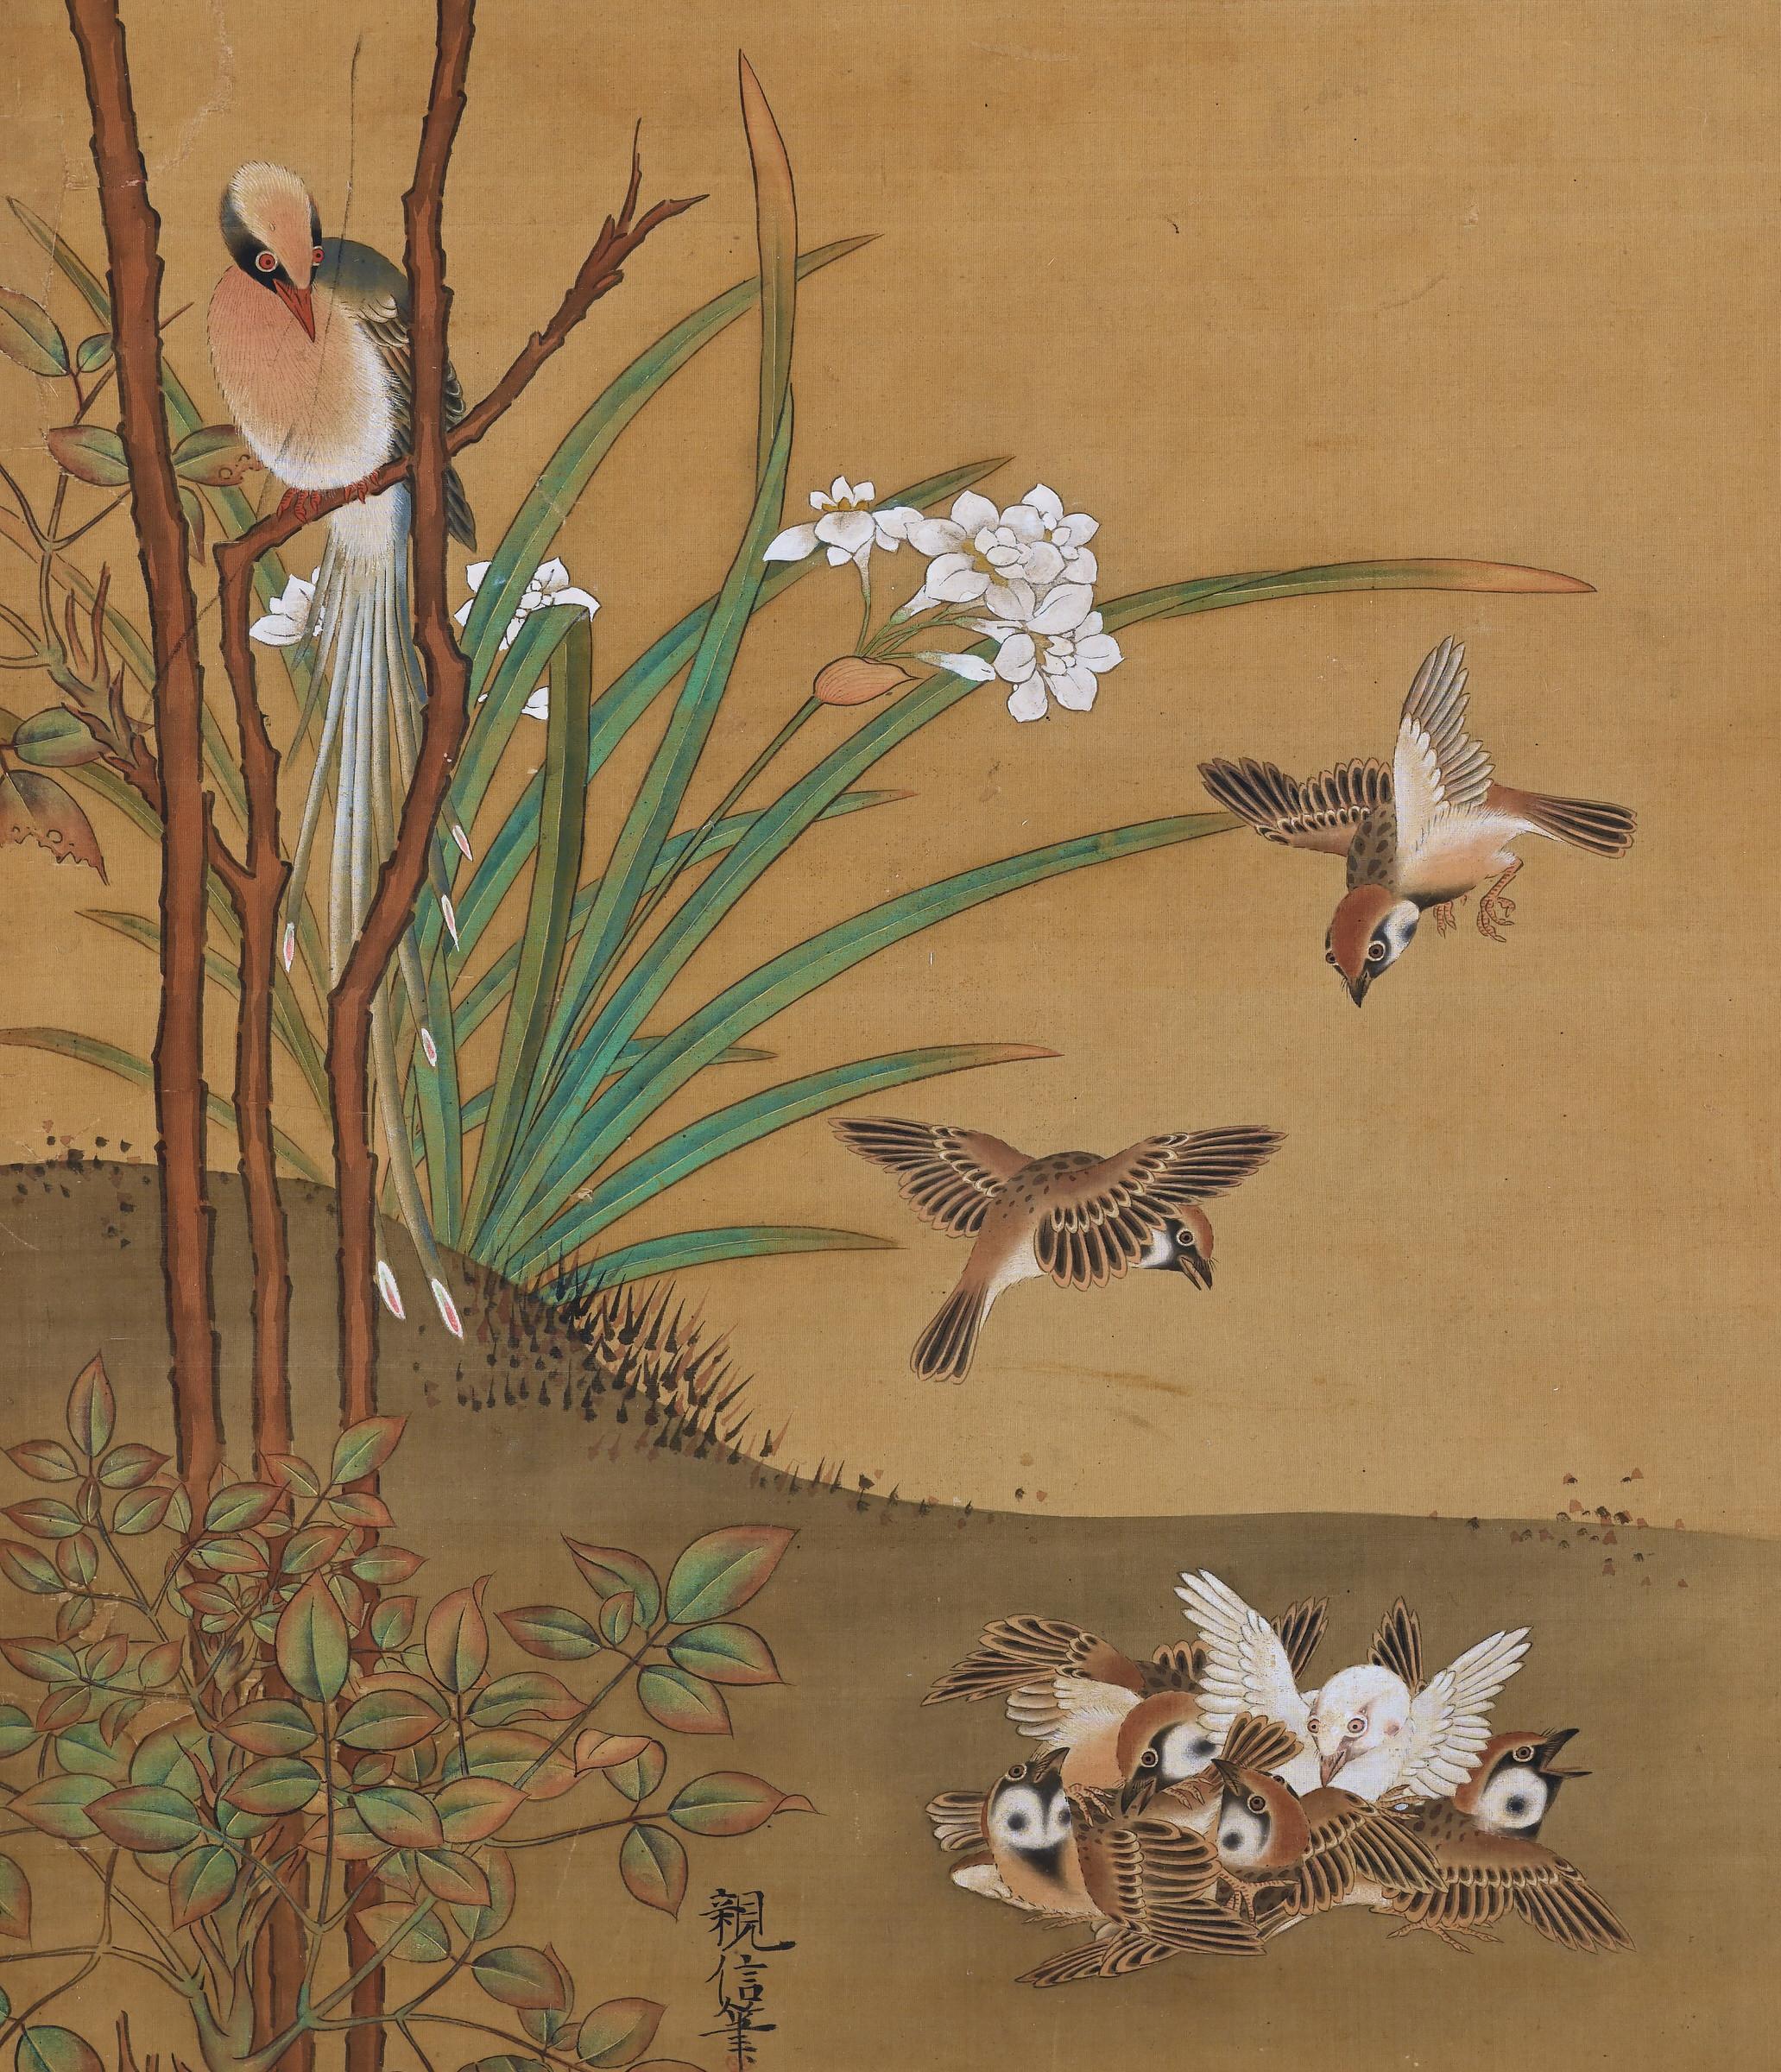 Birds & flowers of the seasons

Pheasants & plum in snow

Unframed painting. Ink, pigment and gofun on silk

Kano Chikanobu 1819-1888

Signature: Chikanobu

Seal: Shateki

Offered here is an unframed ‘kacho-e’ painting by the 19th